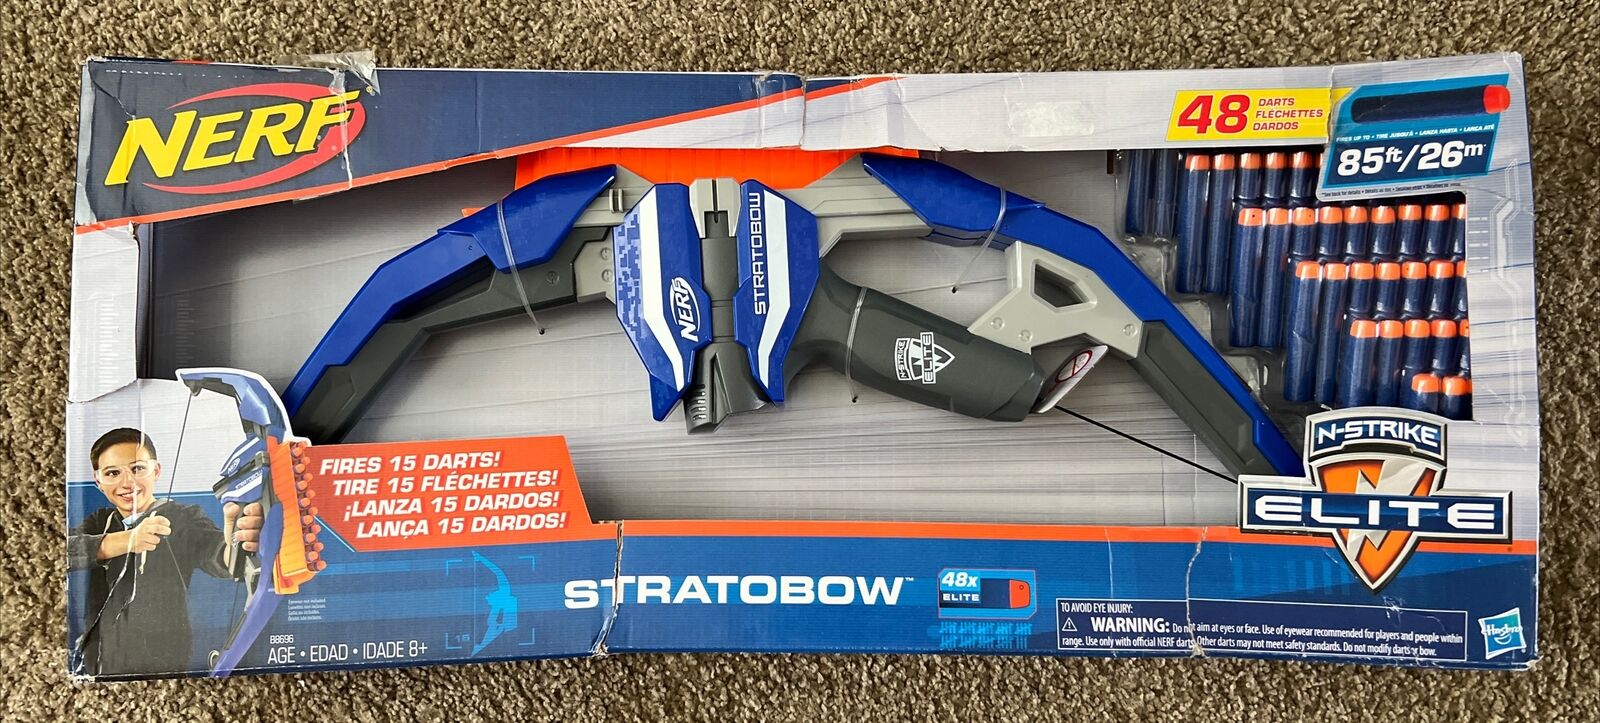 Brand New Nerf N-Strike Elite StratoBow Bow With 48 Darts Included B8696 8+